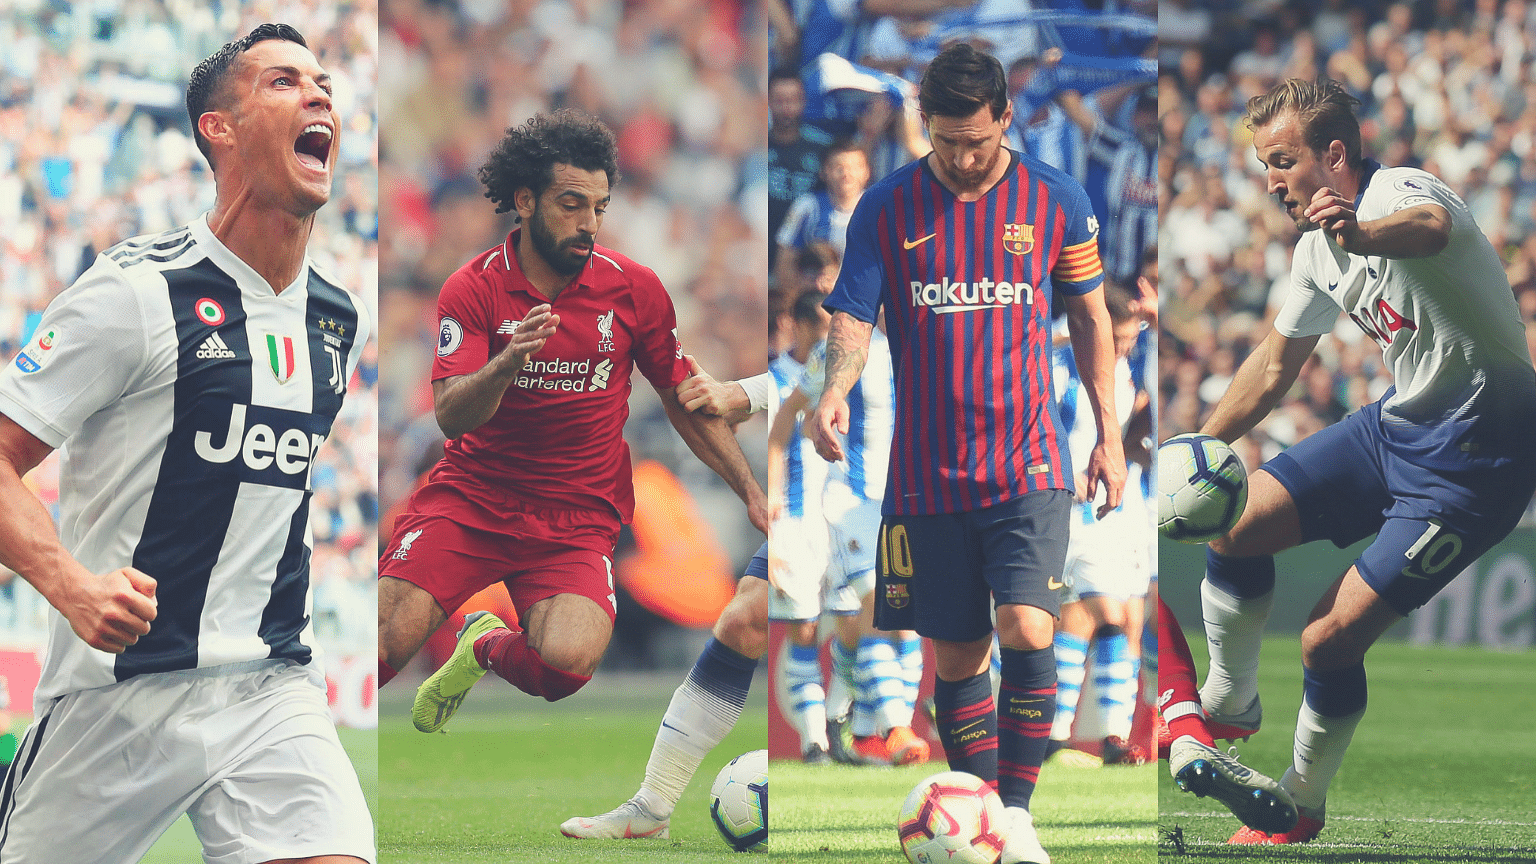 From left to right: Cristiano Ronaldo, Mo Salah, Lionel Messi and Harry Kane.